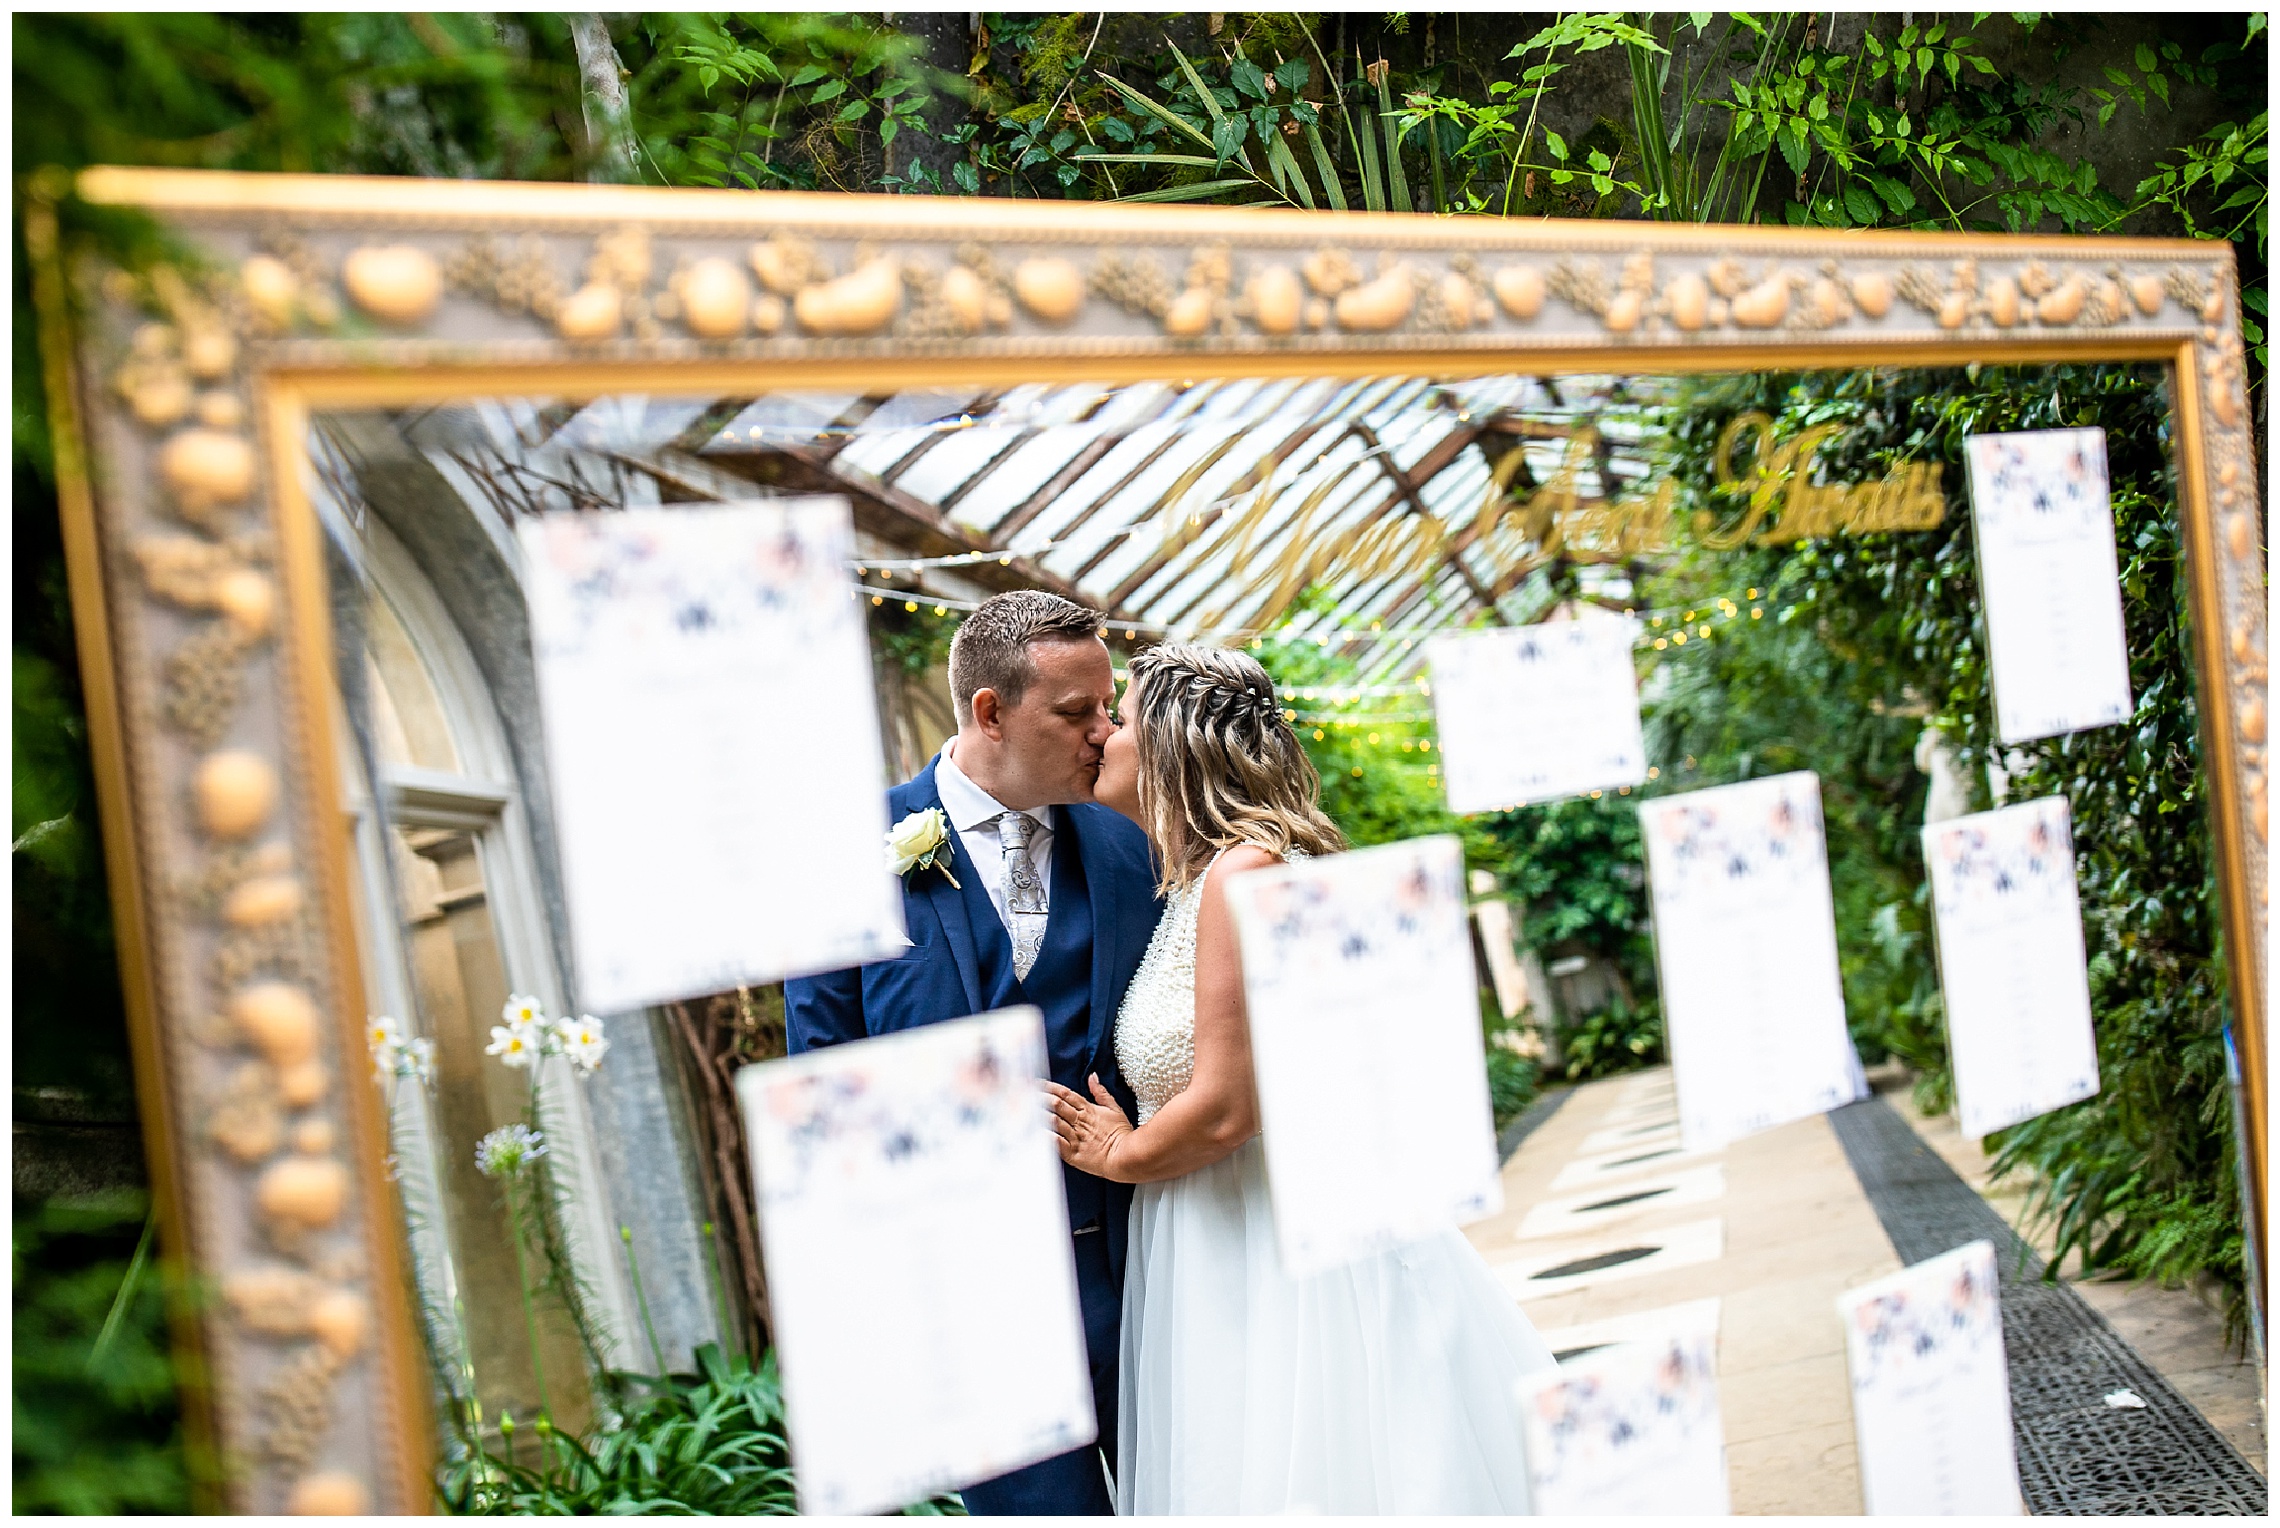 reflection of bride and groom in table plan mirror